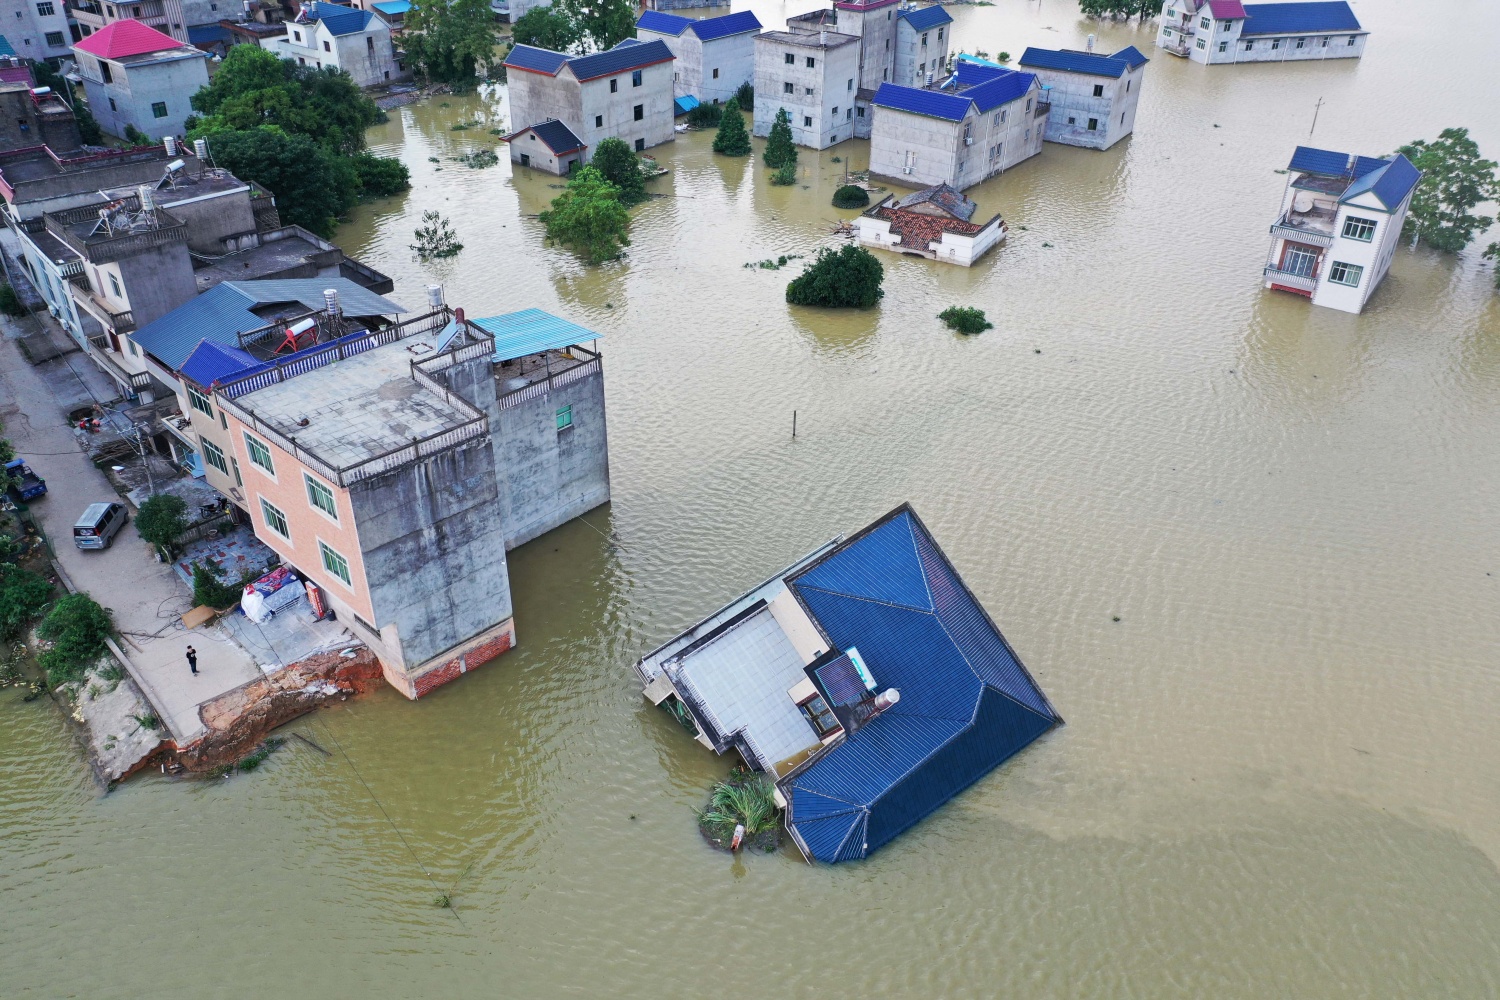 China Flooding Worsens 141 Dead or Missing, 38 Million Affected and